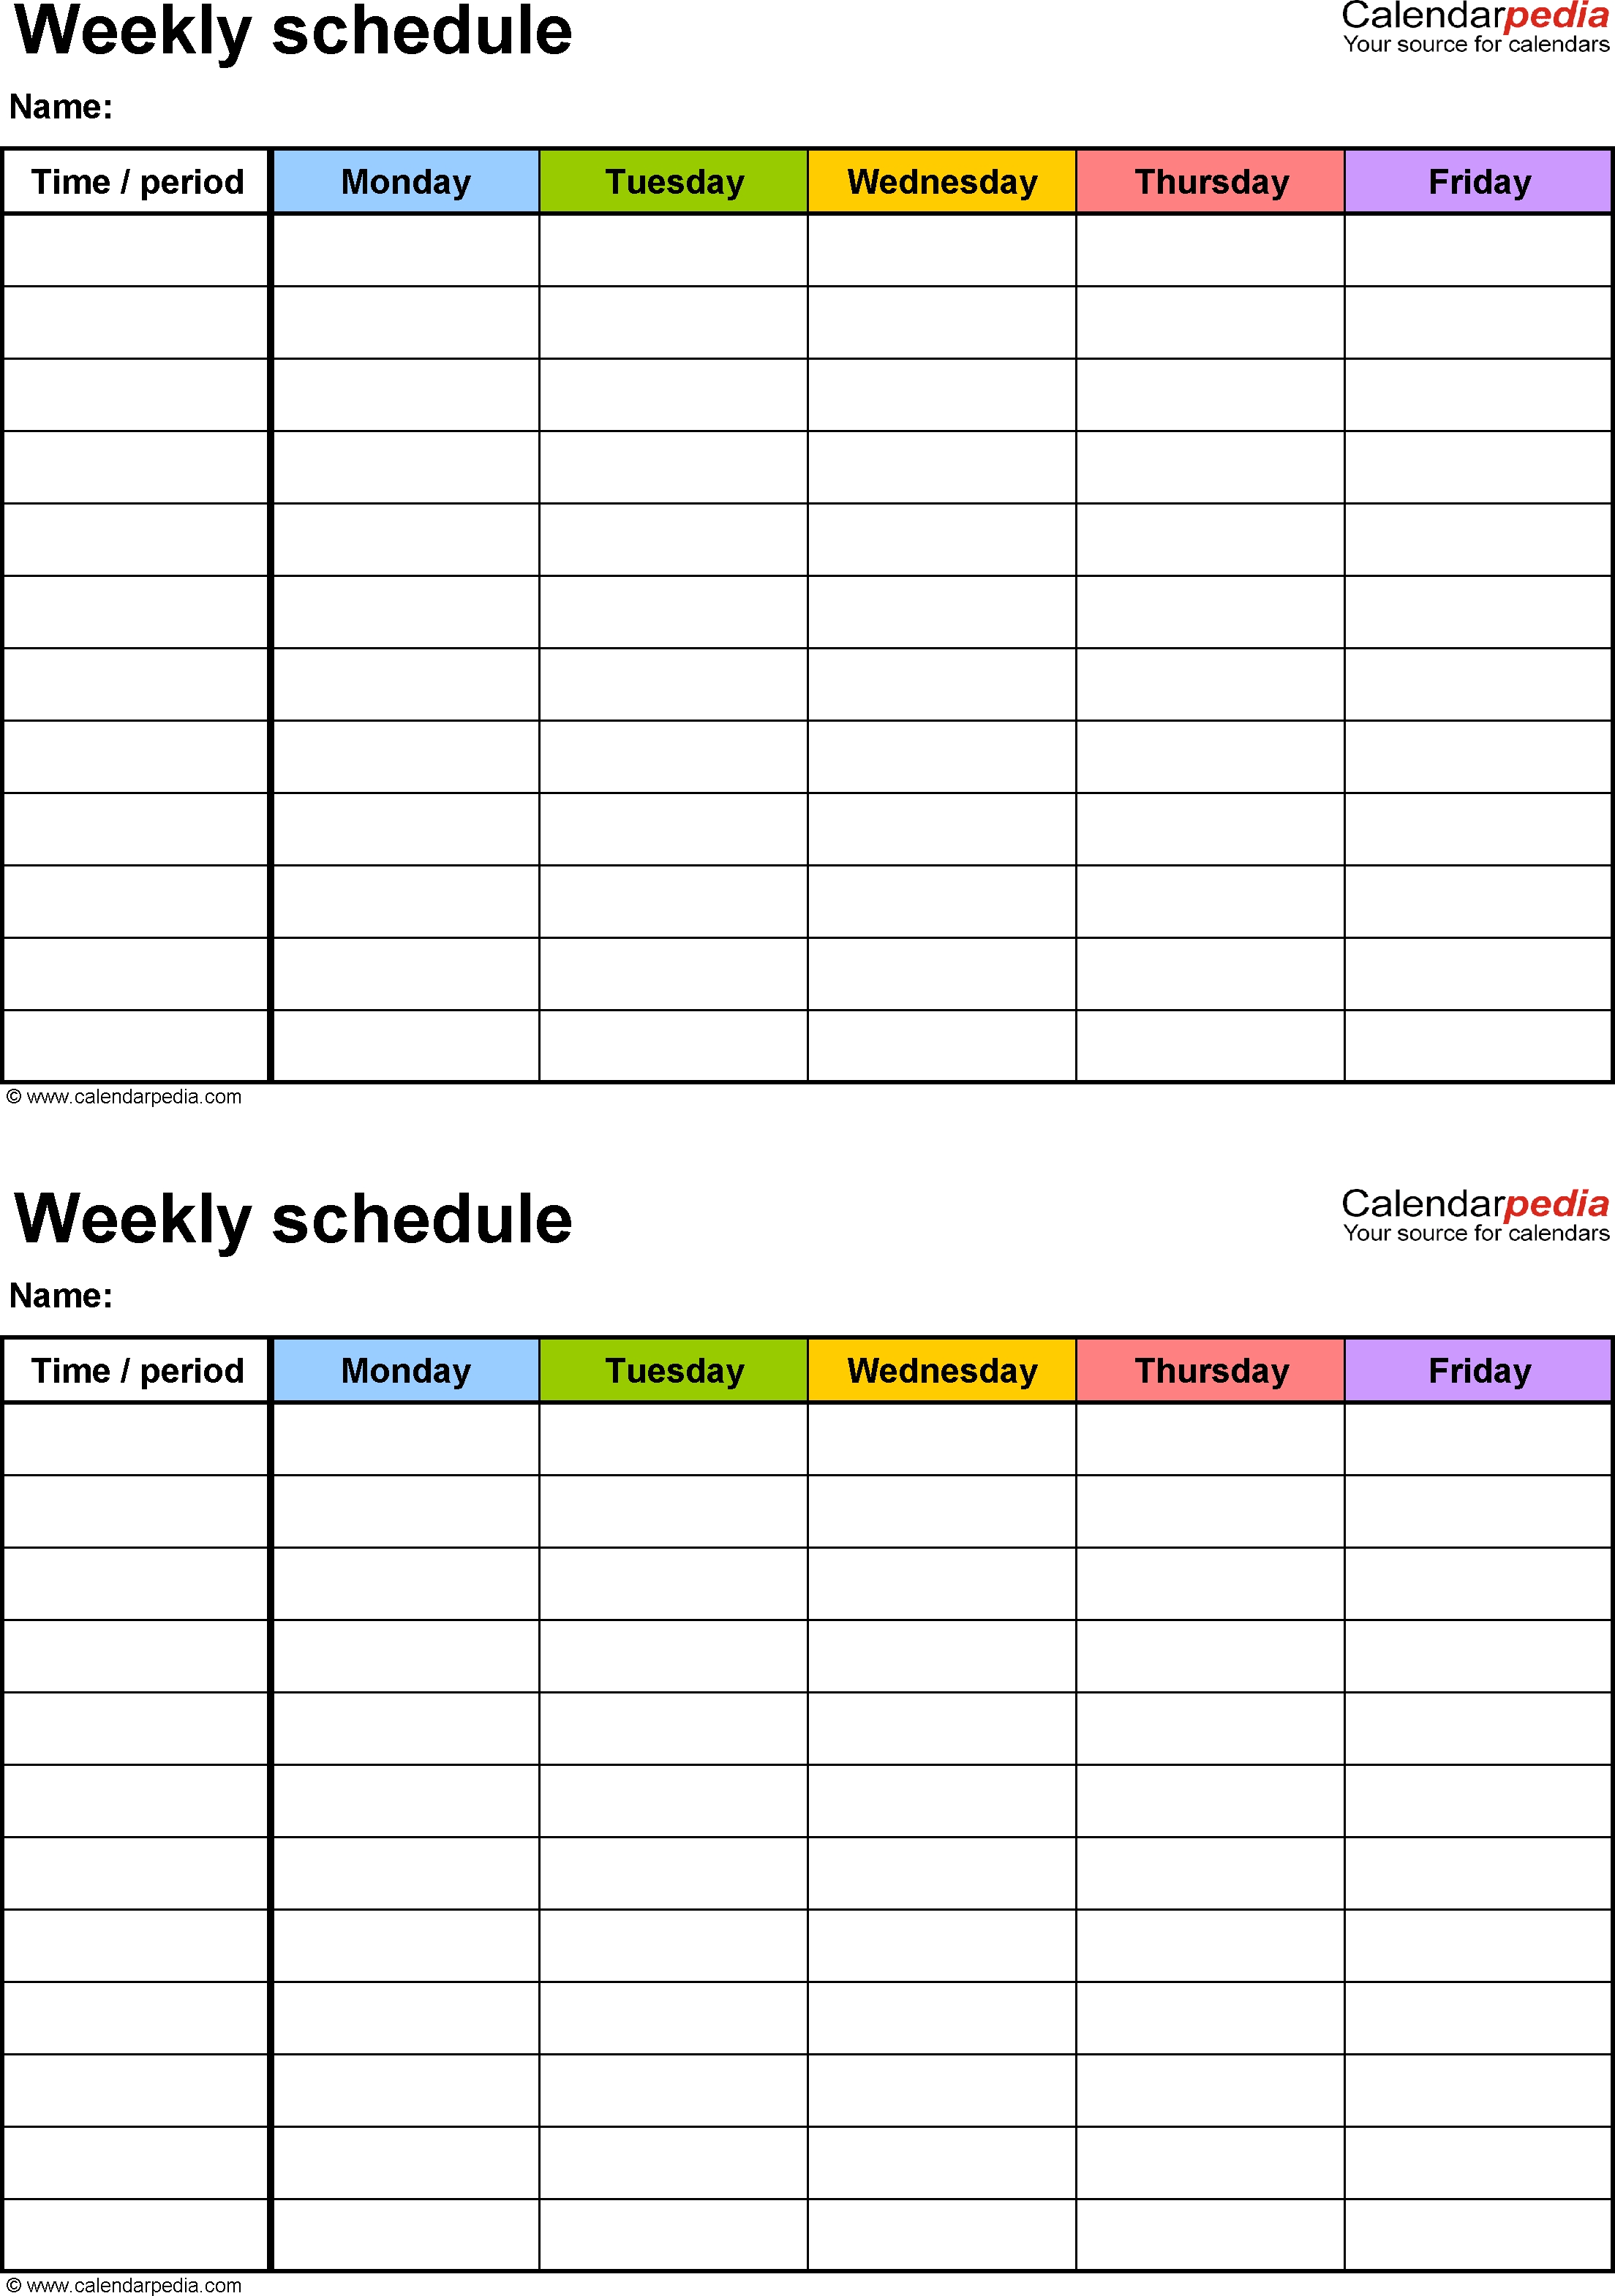 Free Weekly Schedule Templates For Word - 18 Templates-5 Day Weekly Planner Template